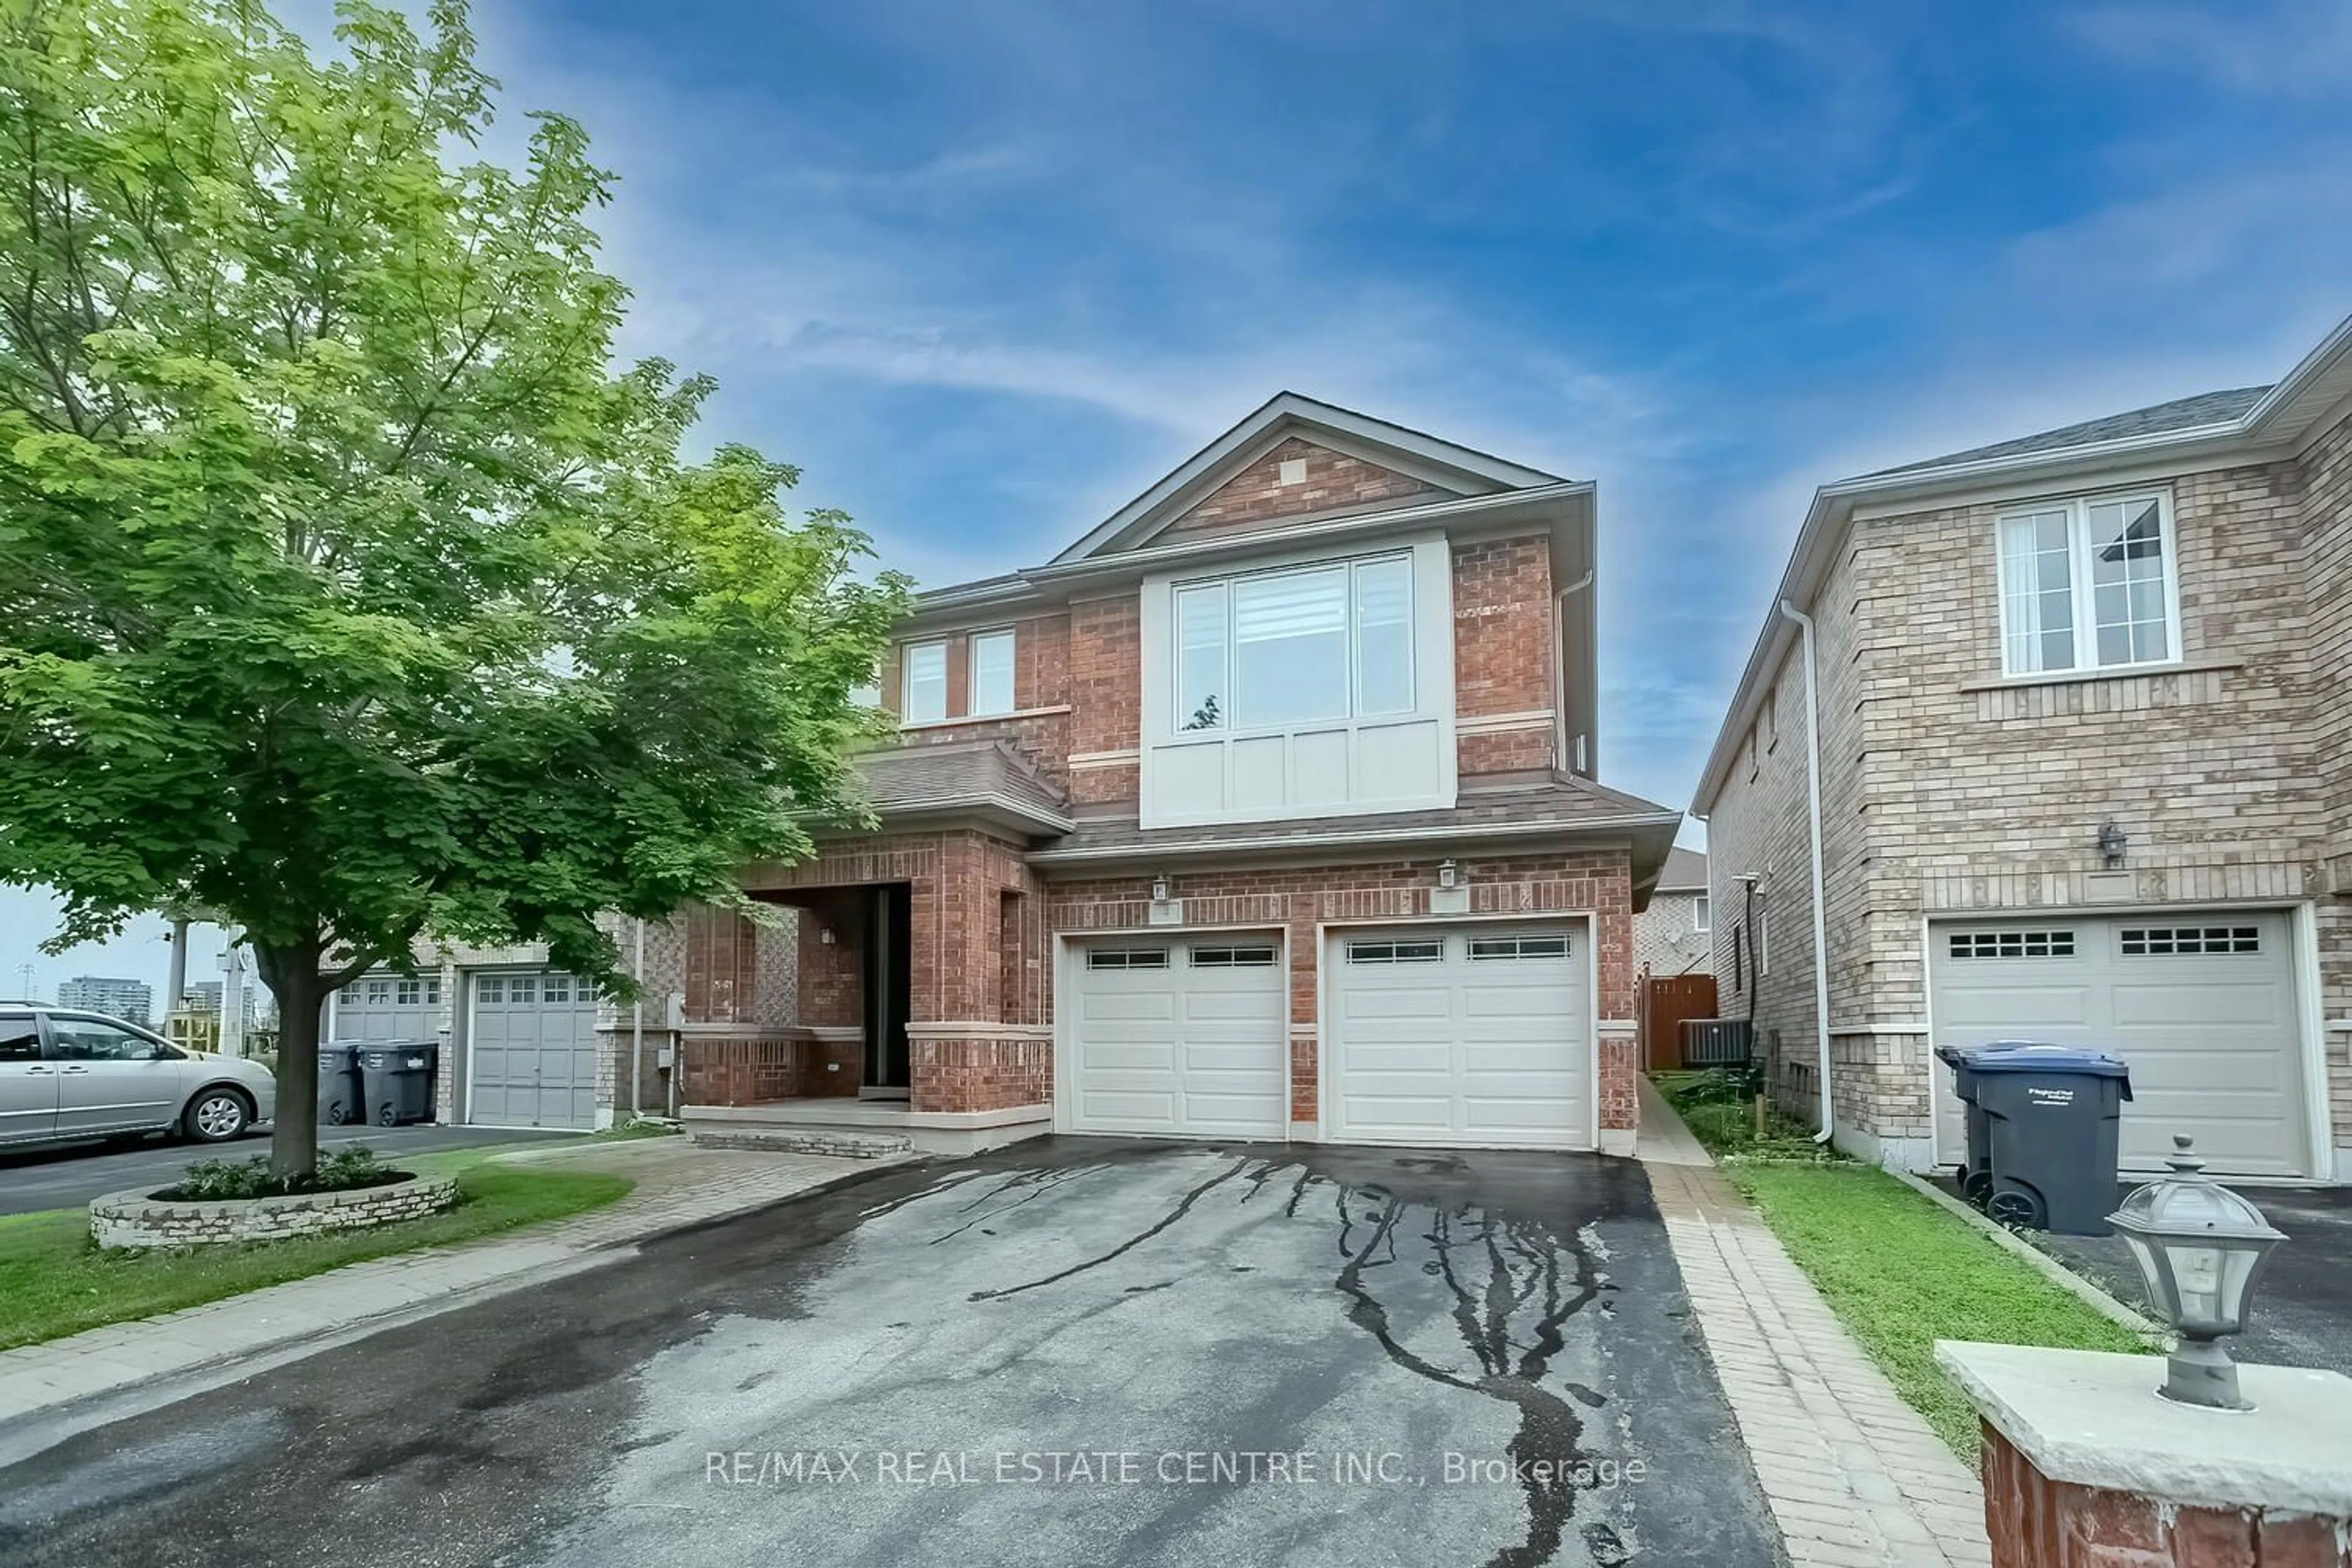 Home with brick exterior material for 4 Mccrimmon Dr, Brampton Ontario L7A 2Z4